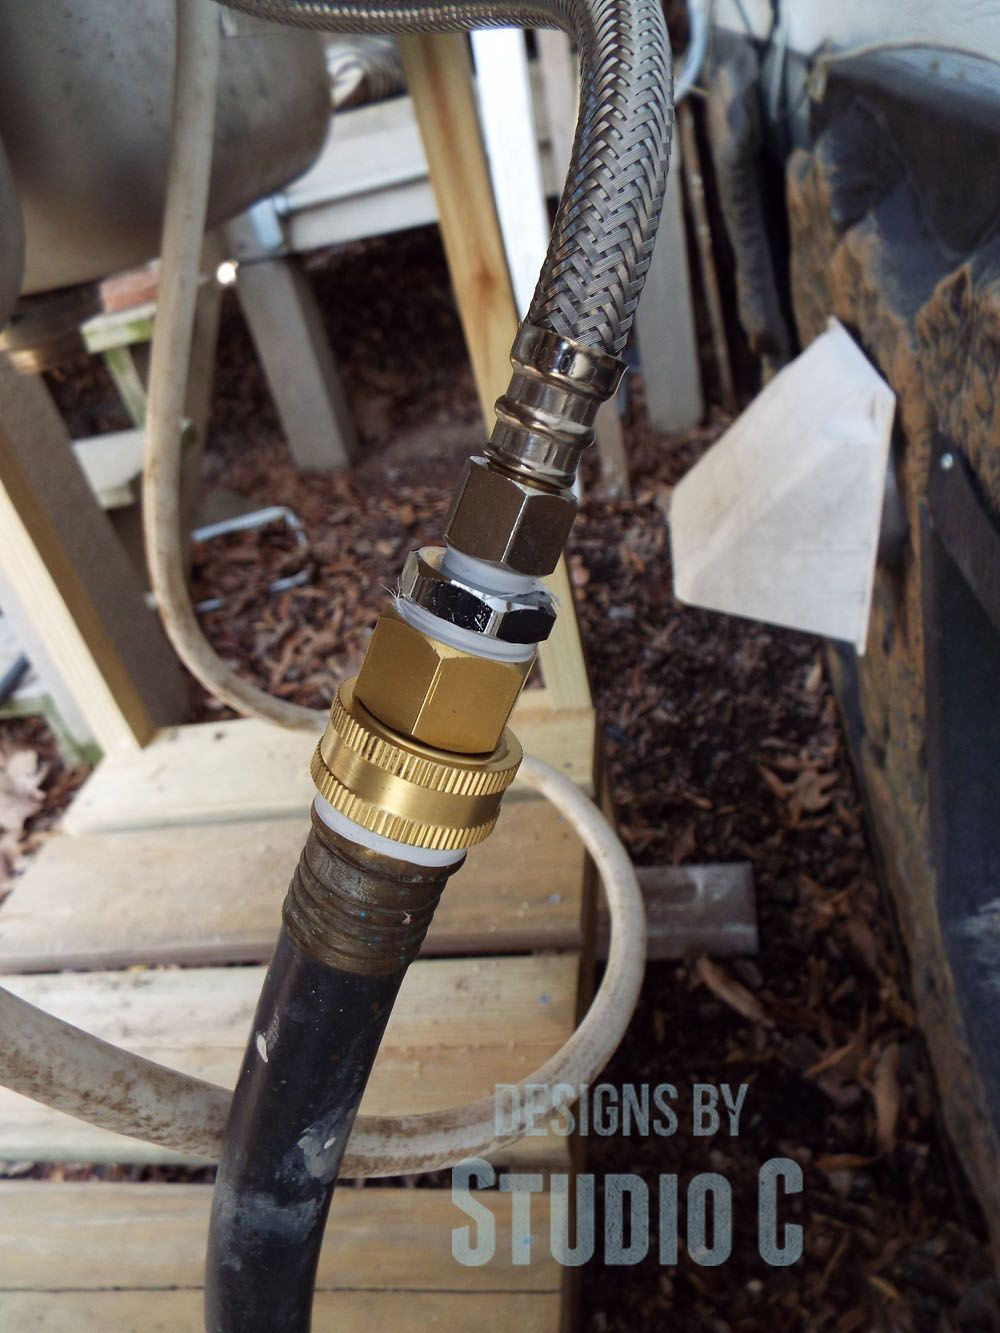 DIY Outdoor Sink Powered By A Water Hose
 Build an Outdoor Sink Part Two – Connecting the Water